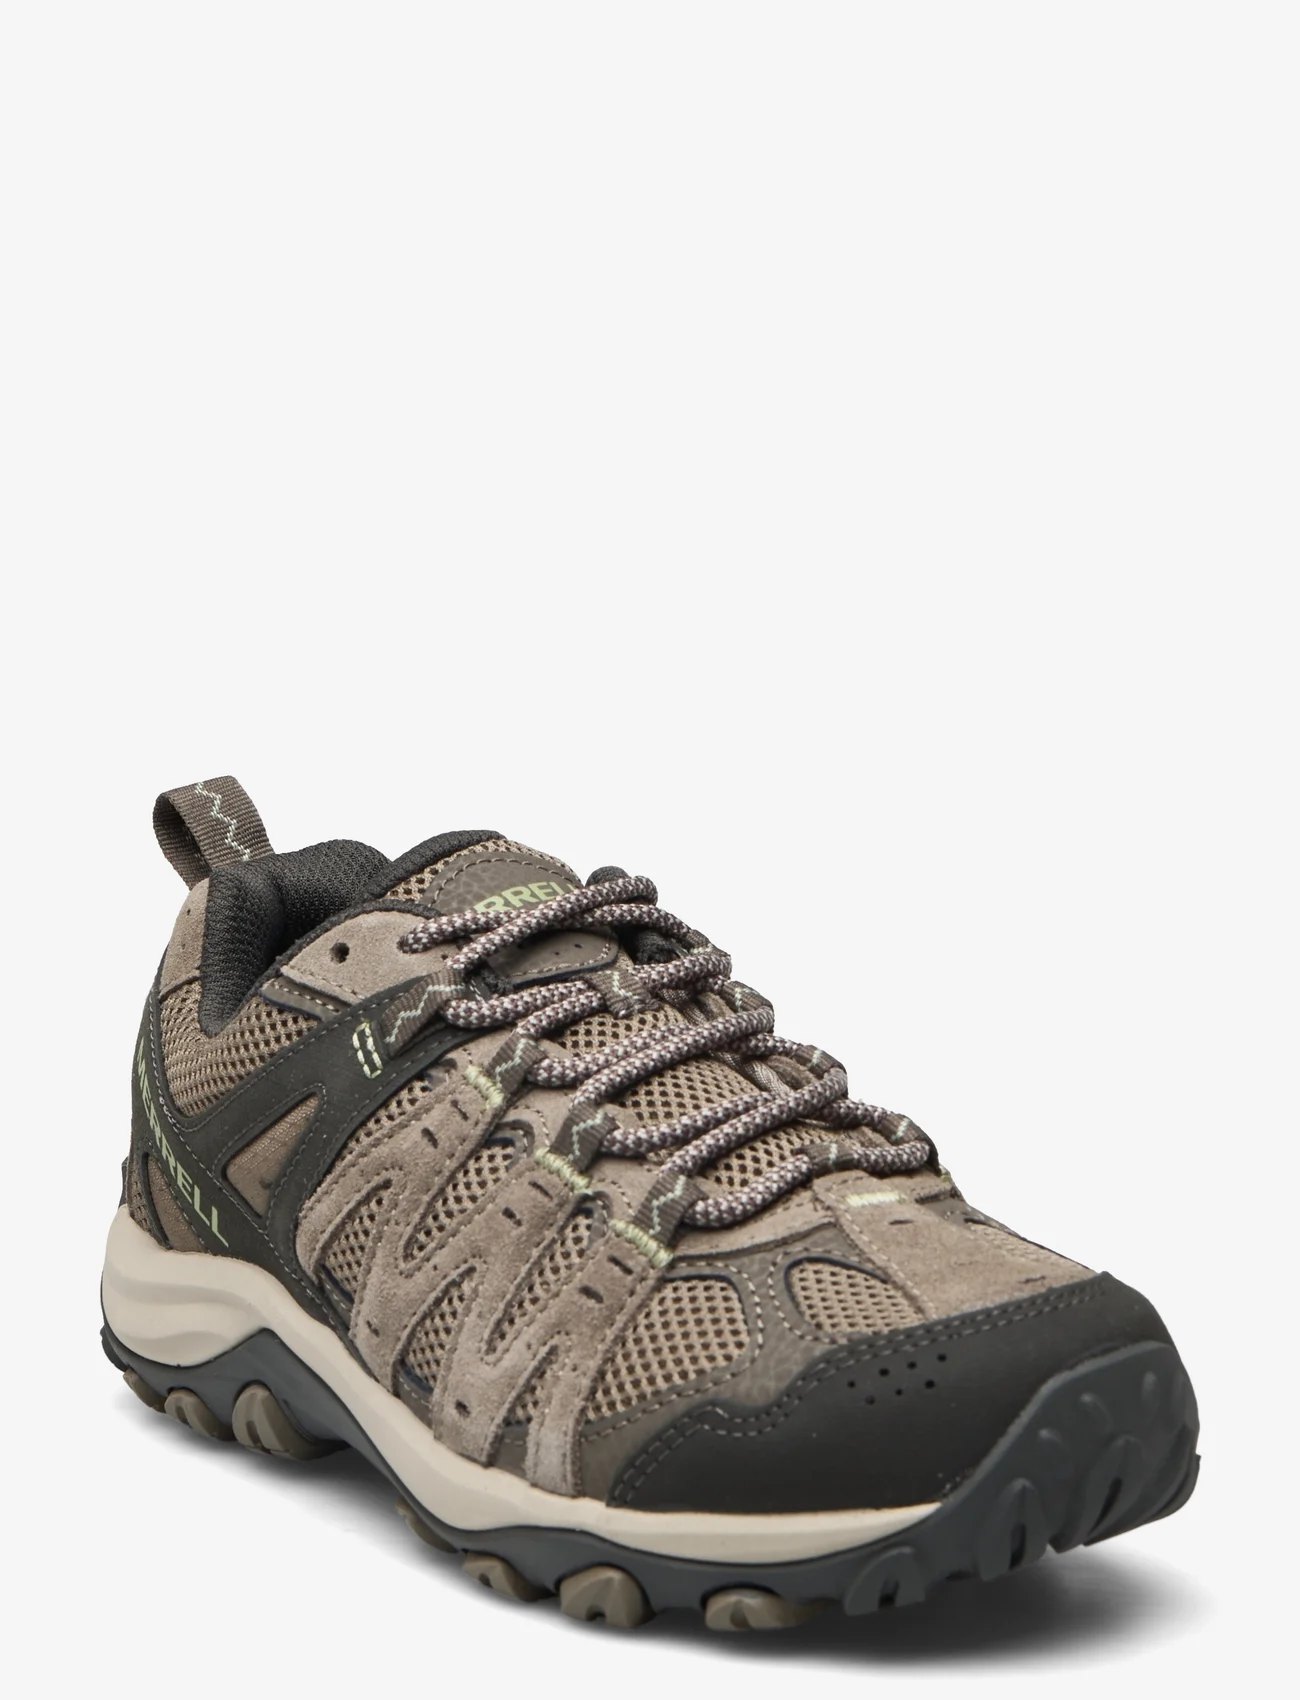 Merrell - Women's Accentor 3 - Brindle - hiking shoes - brindle - 0